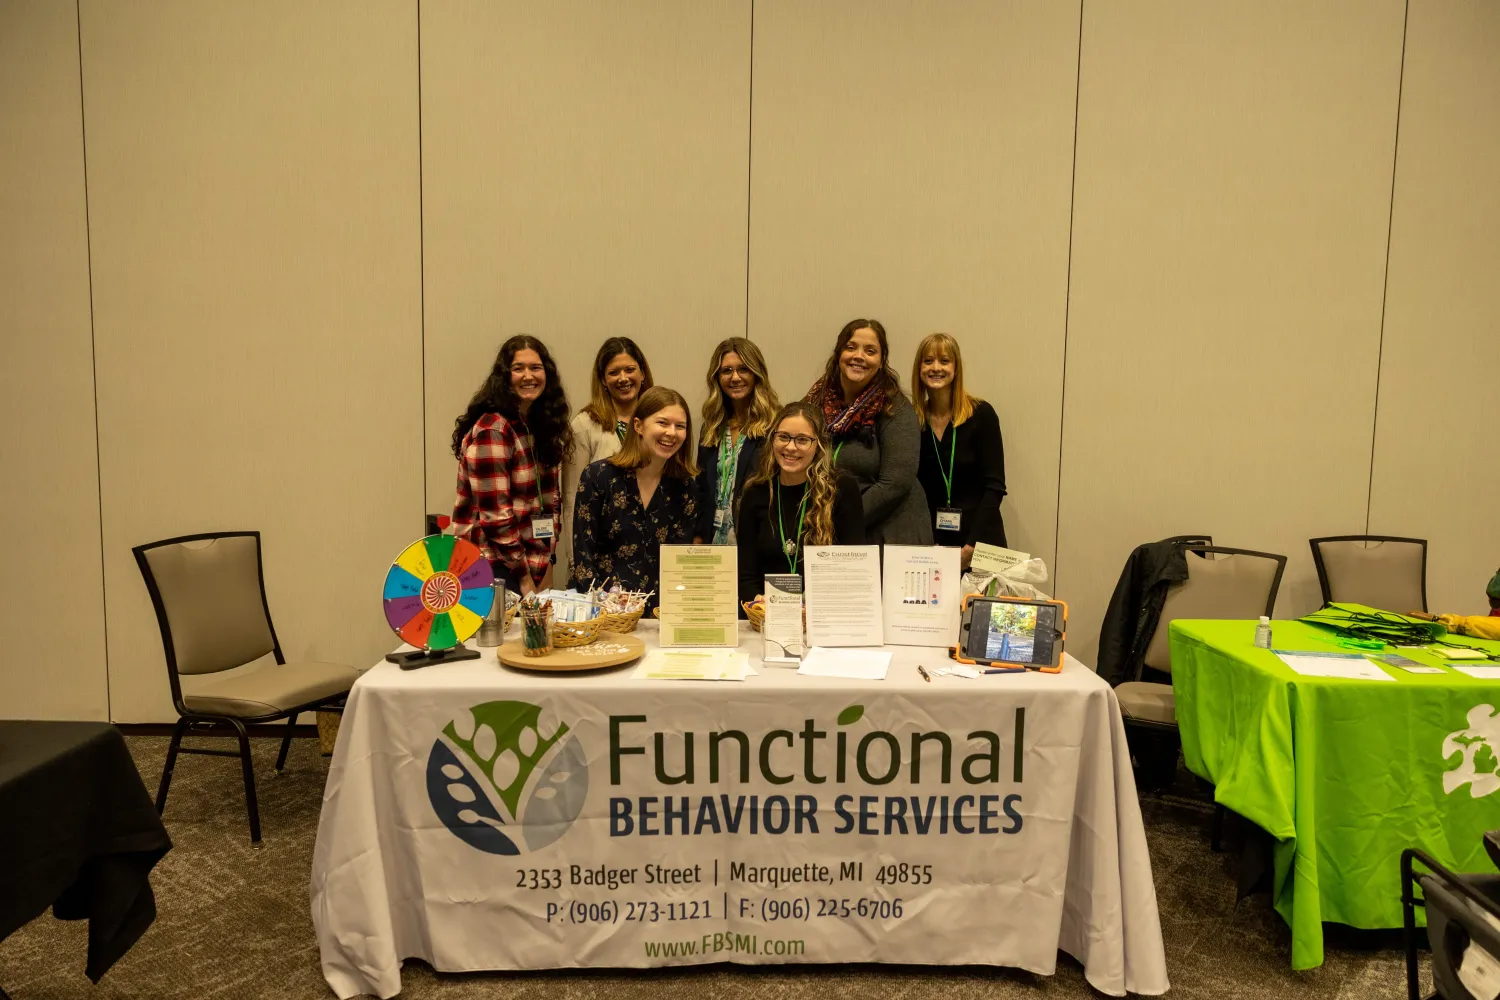 Functional Behavior Services Desk at UP ABA 2022 Conference. 